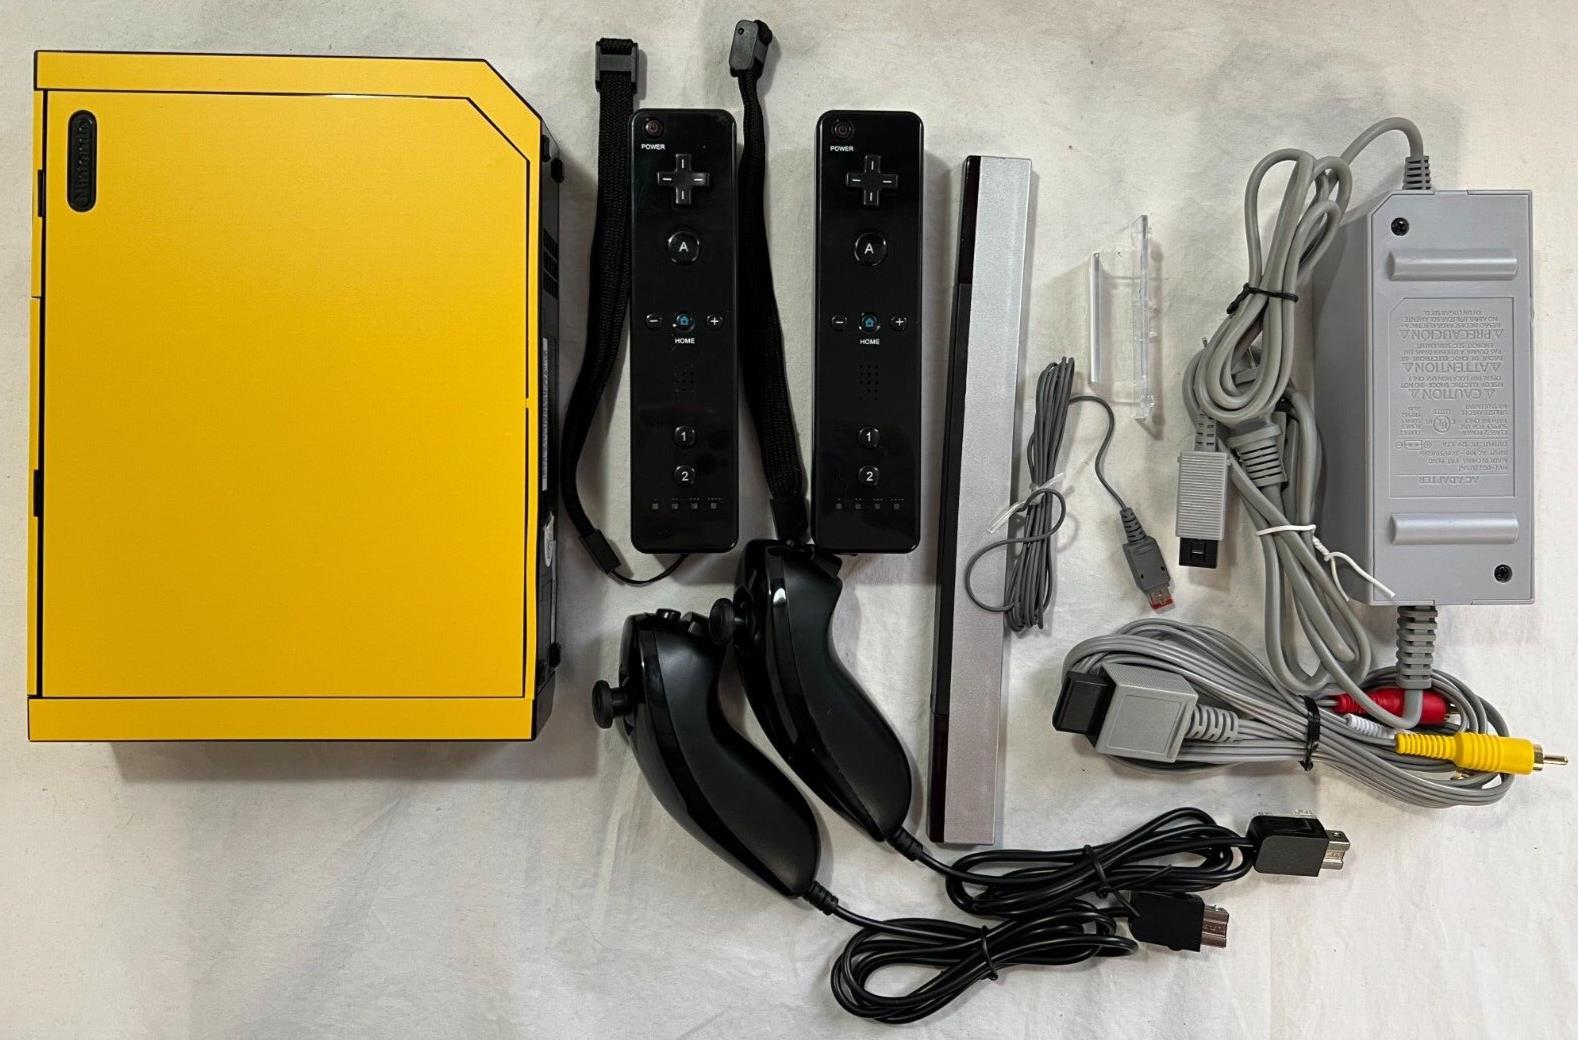 CUSTOM YELLOW Nintendo Wii Video Game System Console 2-REMOTE Accessor